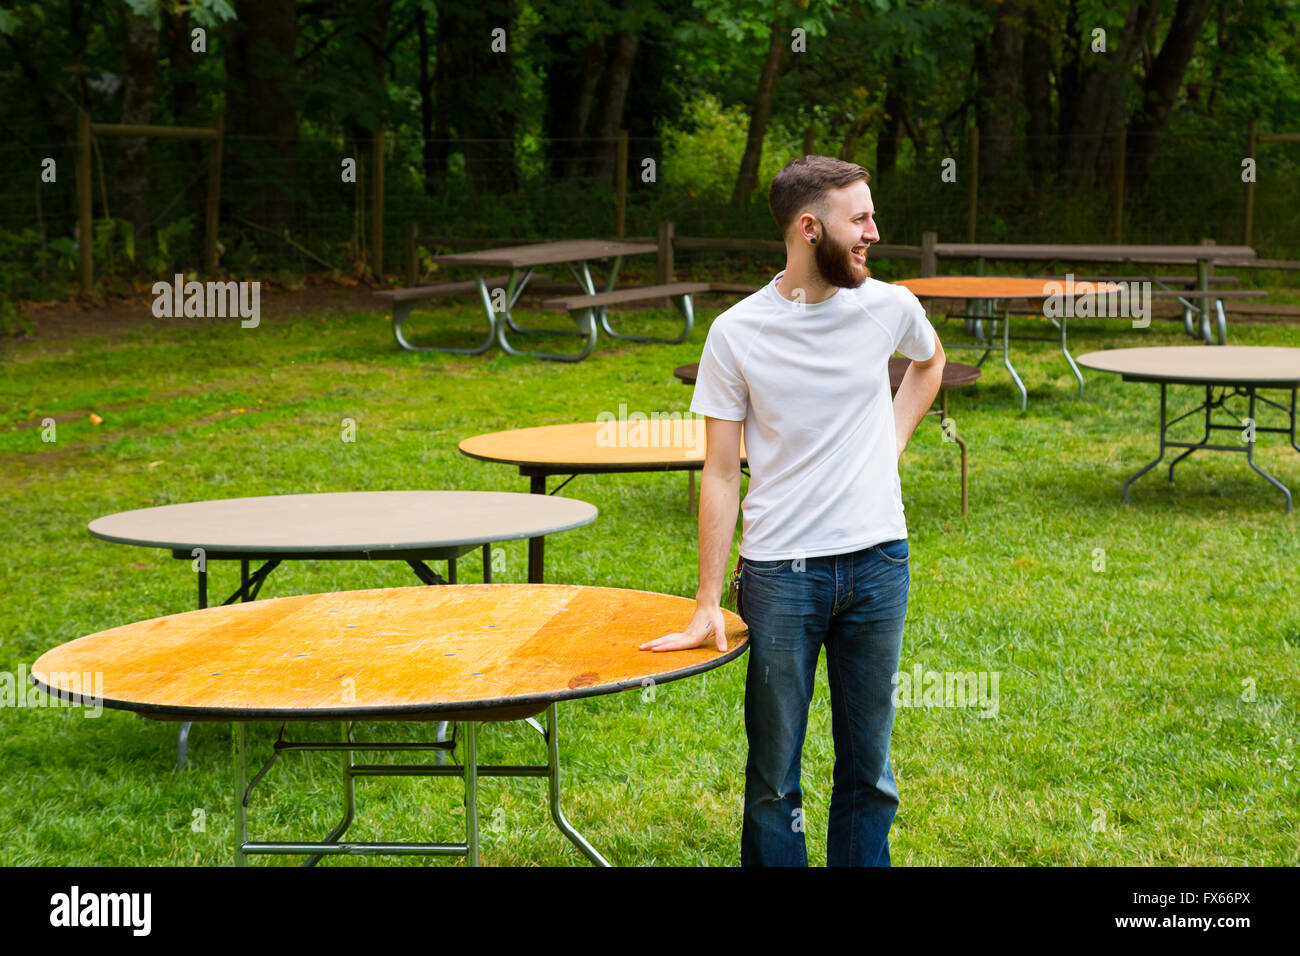 Groom wearing a white t-shirt setting up tables on his wedding day outdoors. Stock Photo